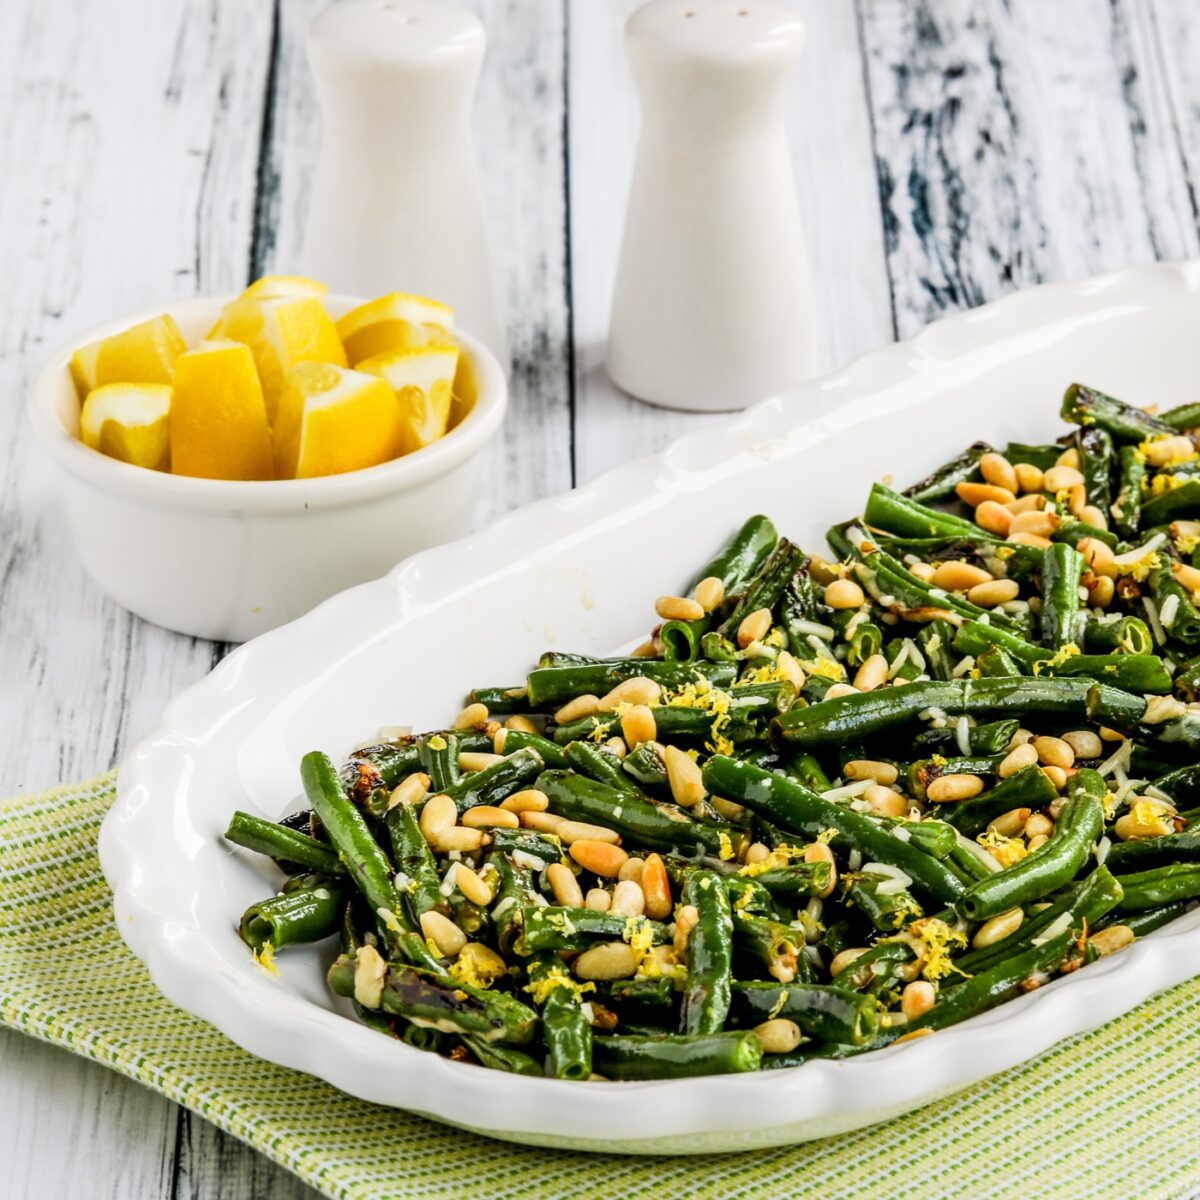 Green Beans with Lemon, Parmesan, and Pine Nuts shown on serving platter with lemons in back.